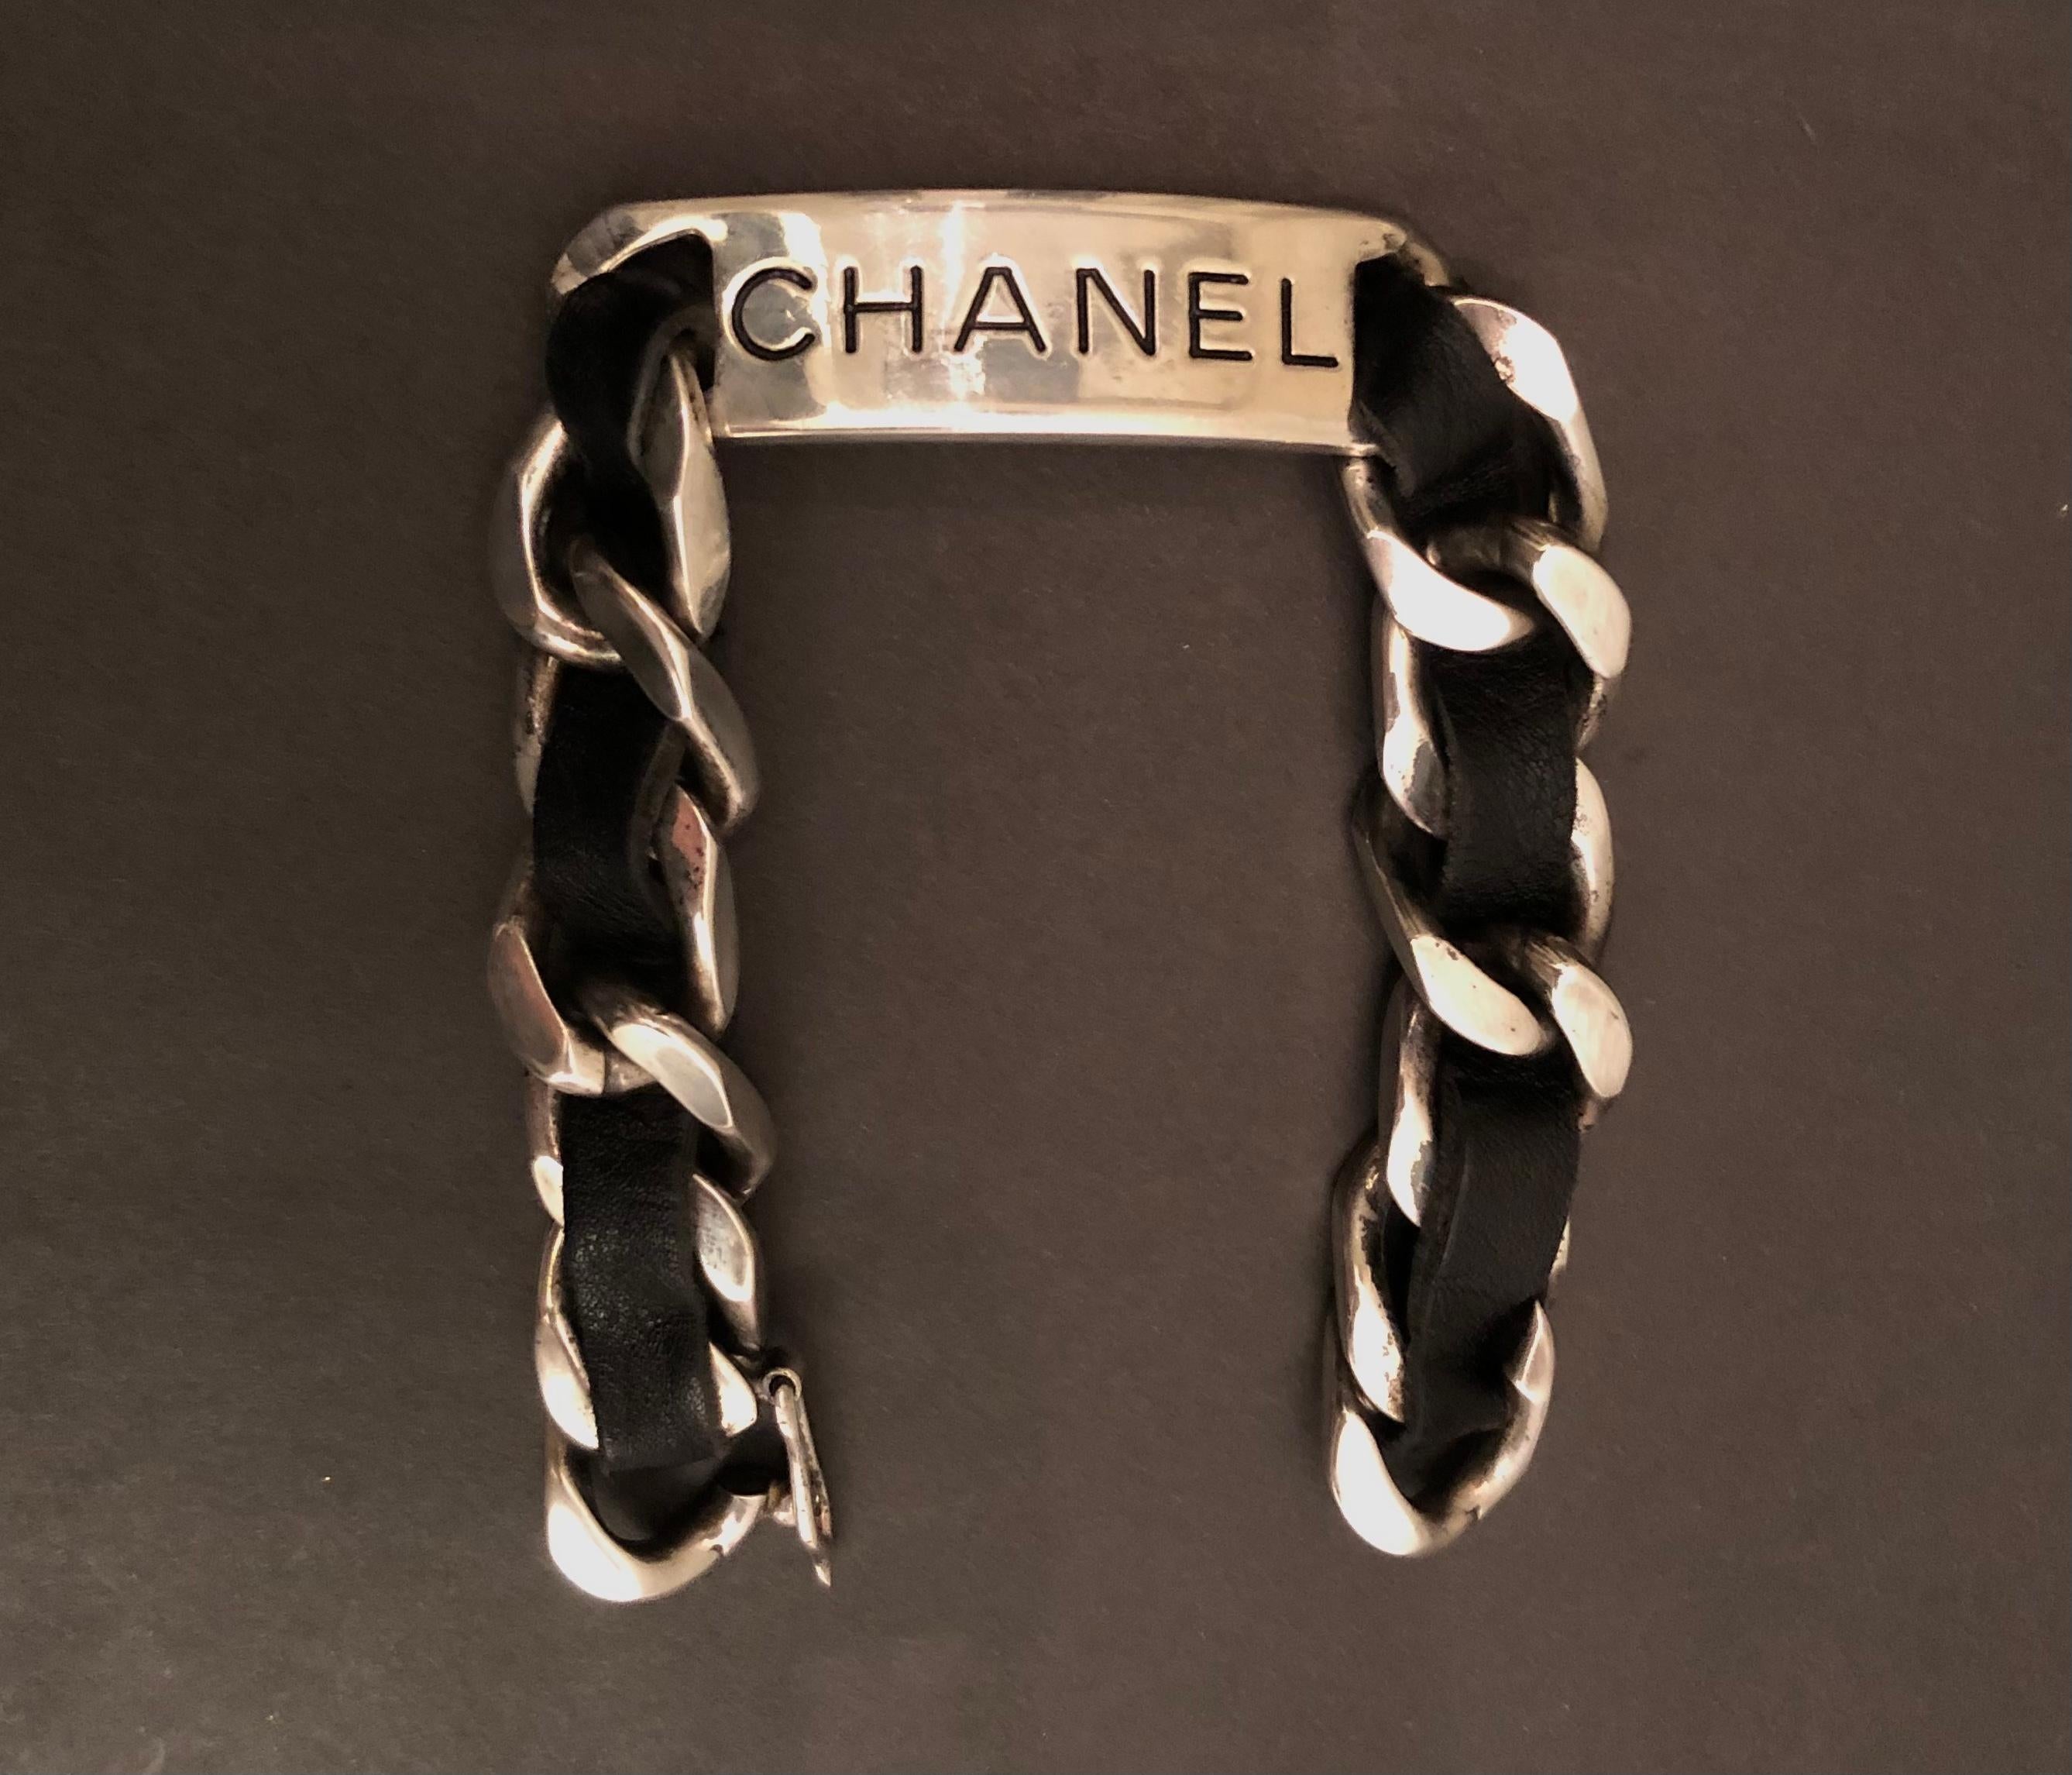 This vintage Chanel silver toned chain link bracelet is crafted of silver toned metal interlaced with black lambskin leather. Hook fastening. Stamped CHANEL 96P, made in France. Inner circumference measures approximately 20cm. Comes with